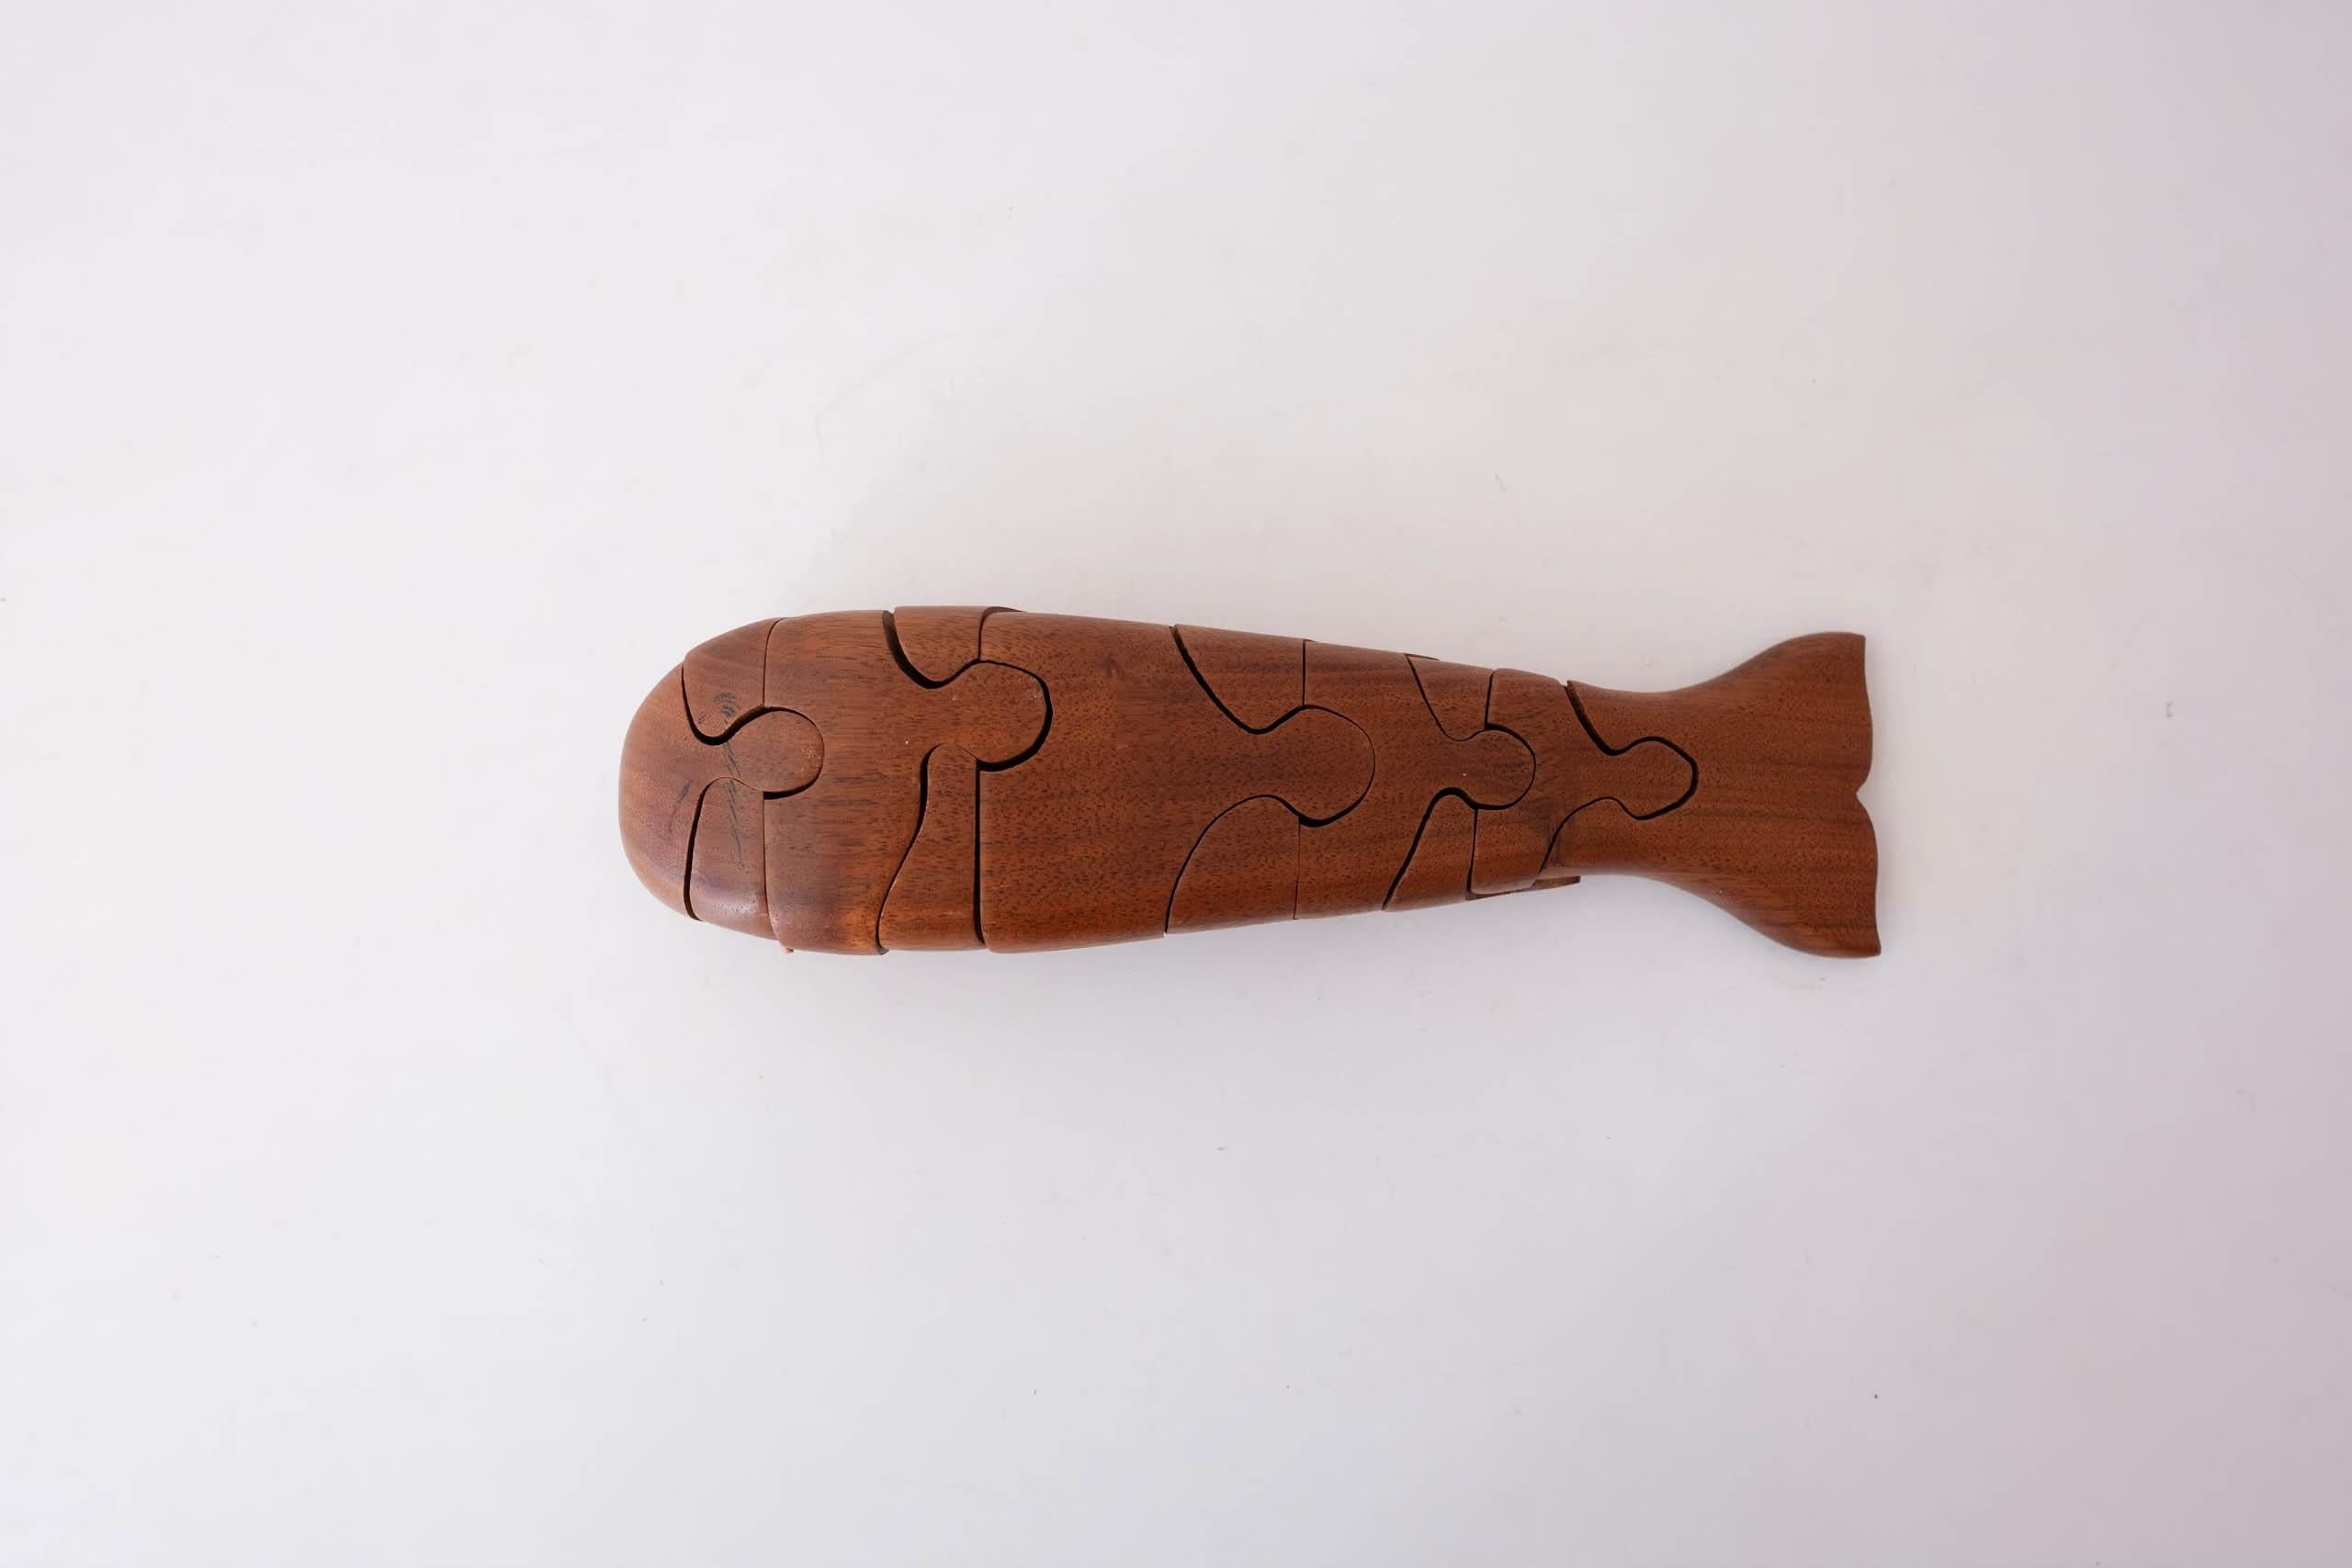 Folk Art Handcrafted Wood Whale Puzzle Sculpture Signed For Sale